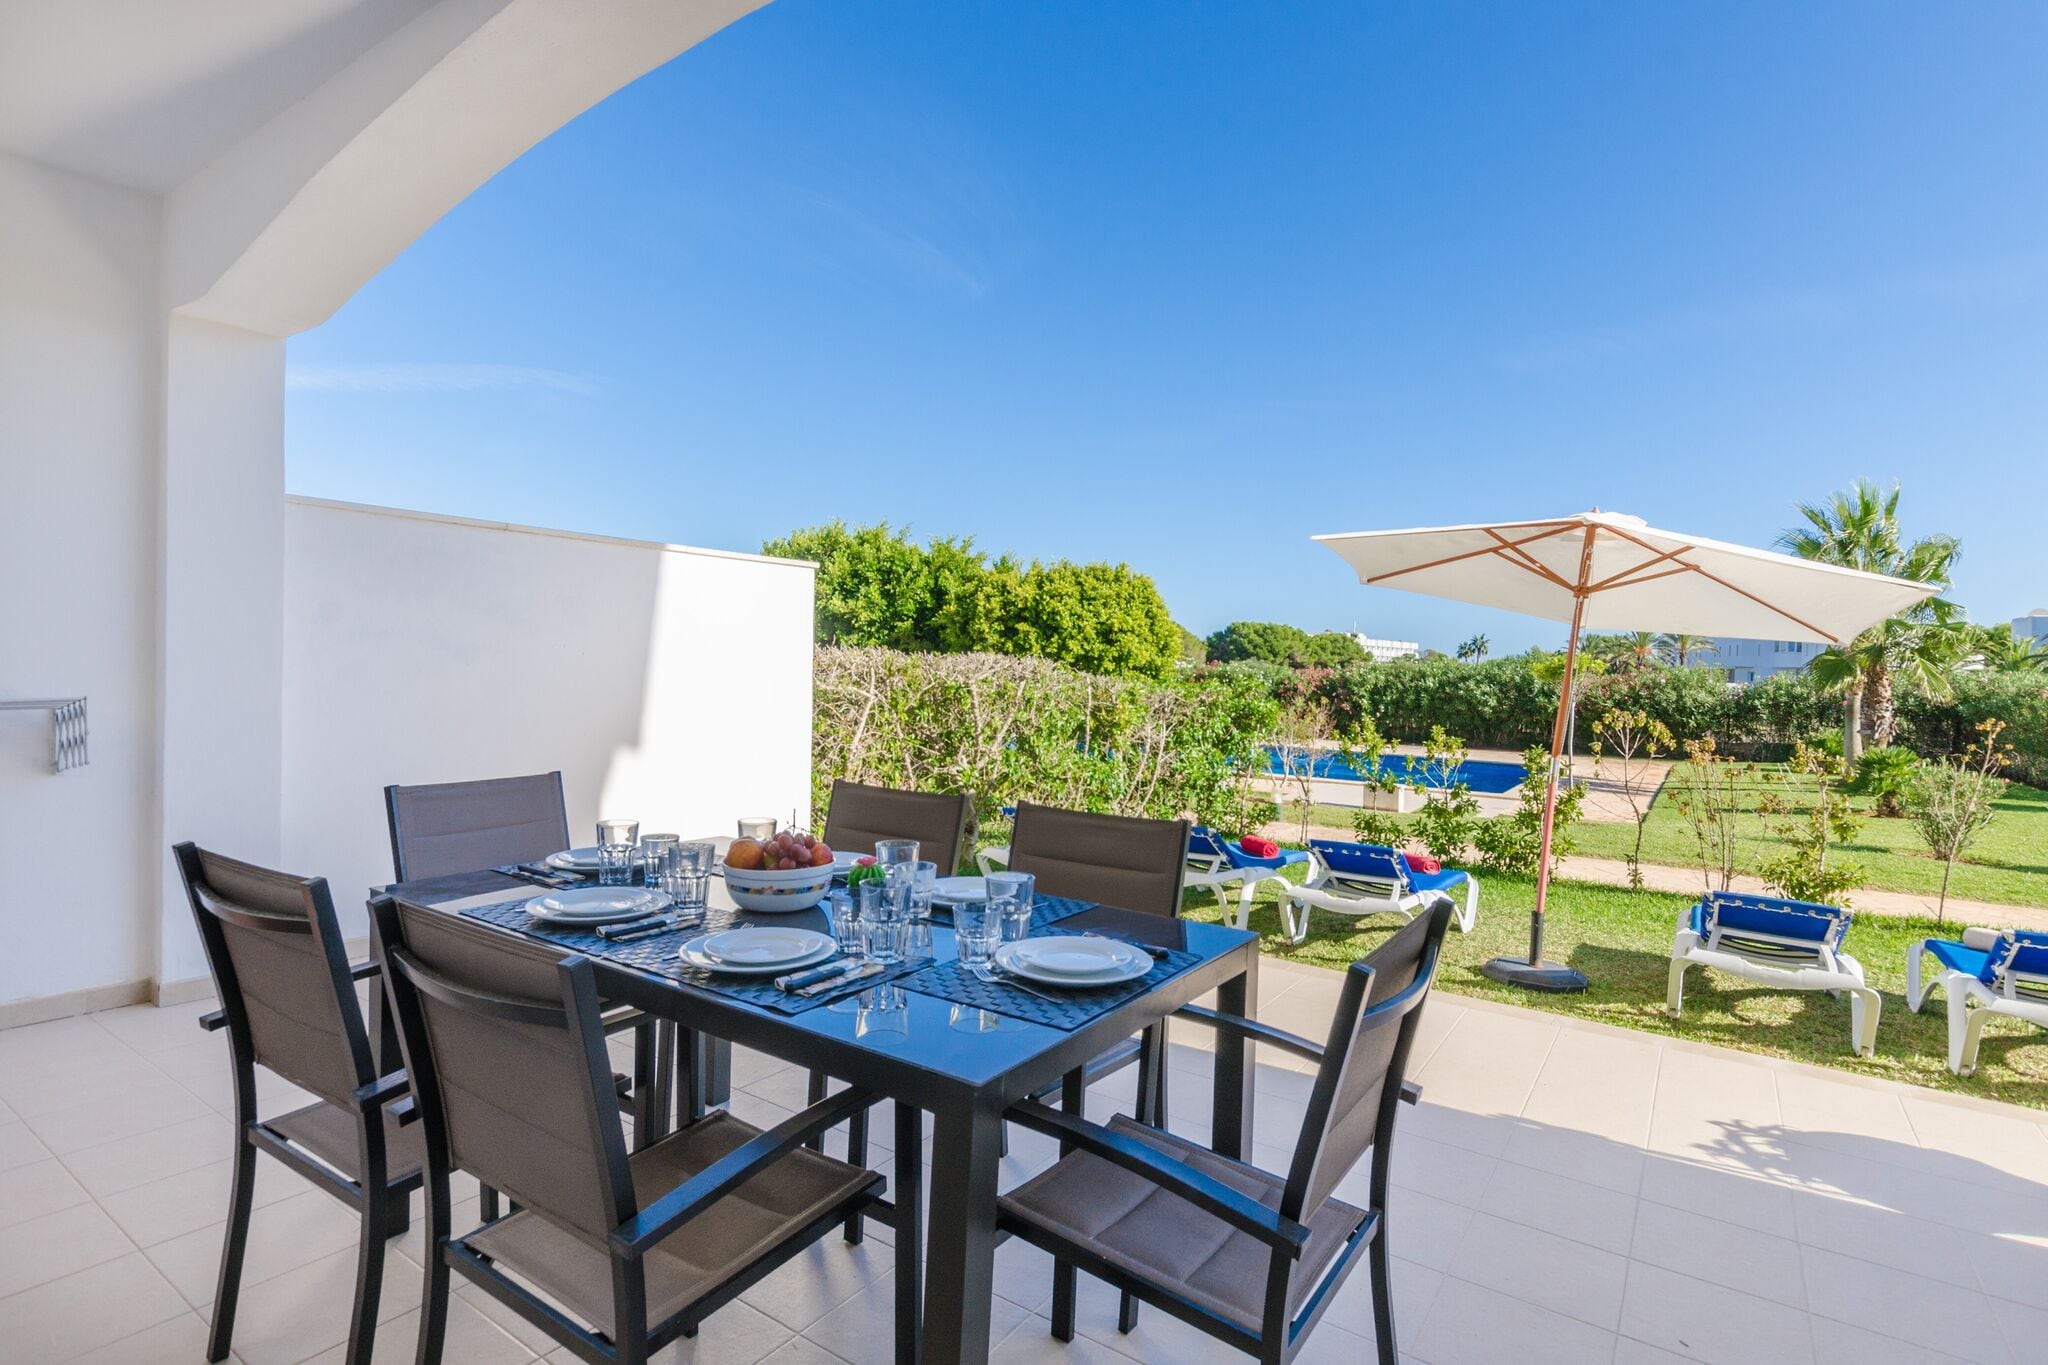 CELESTE - Apartment for 6 people in Cala d'or.